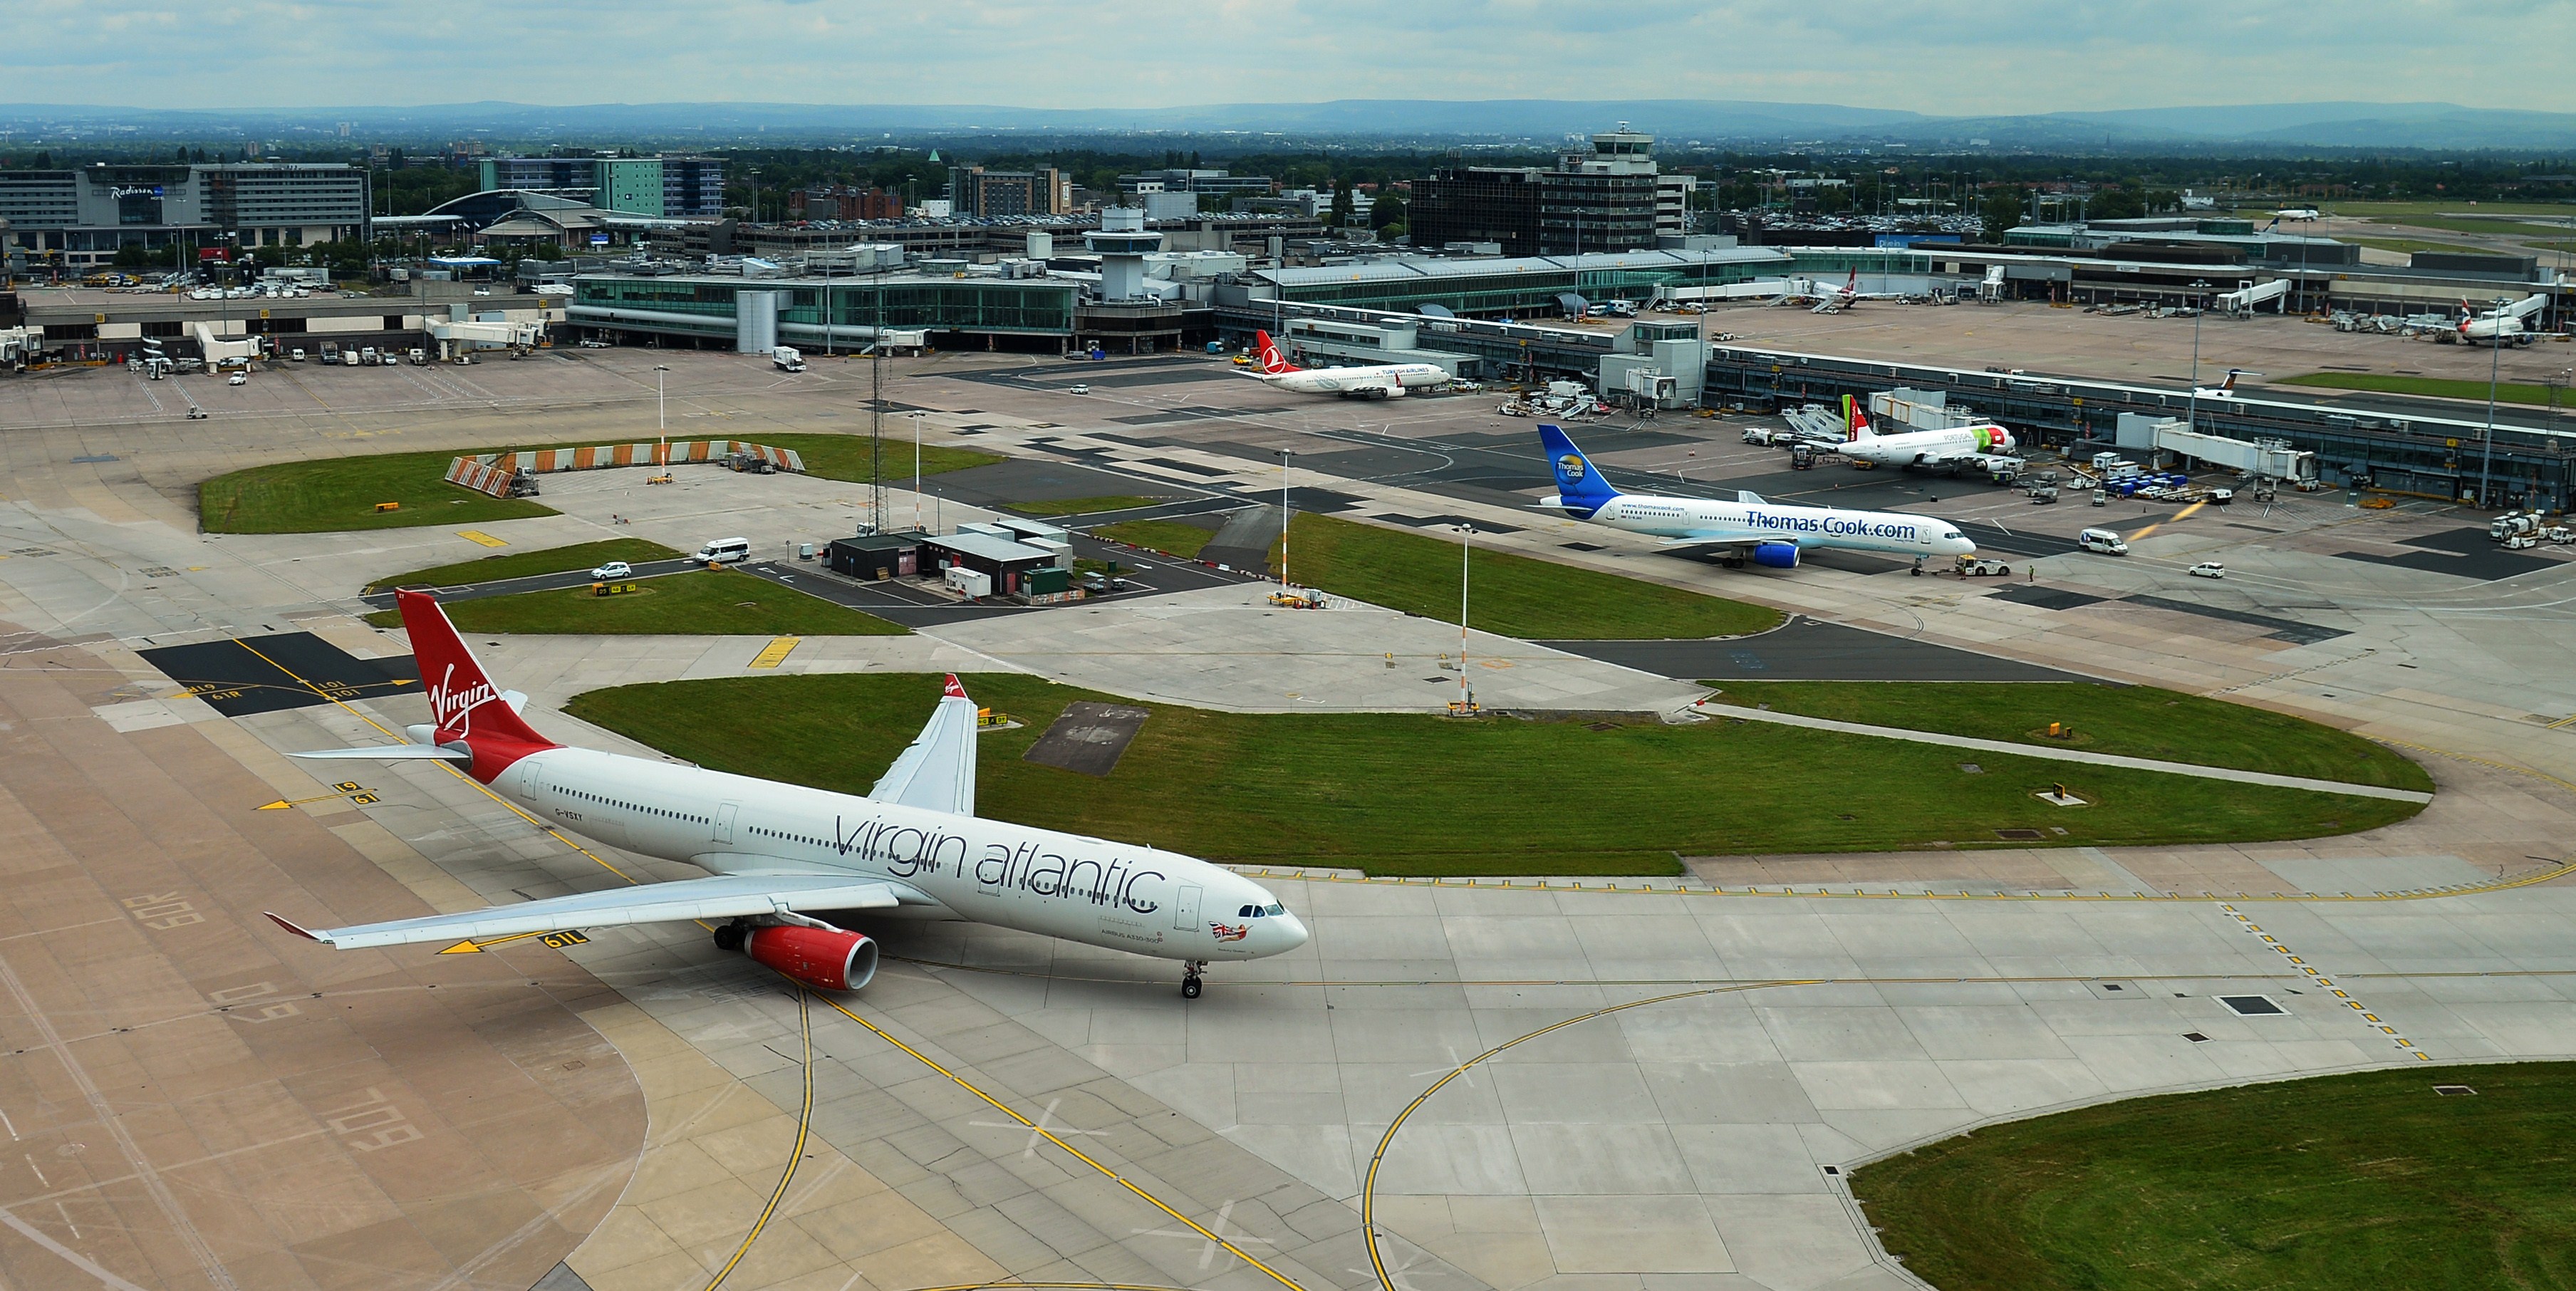 Manchester Airport's Terminal 3 to reopen